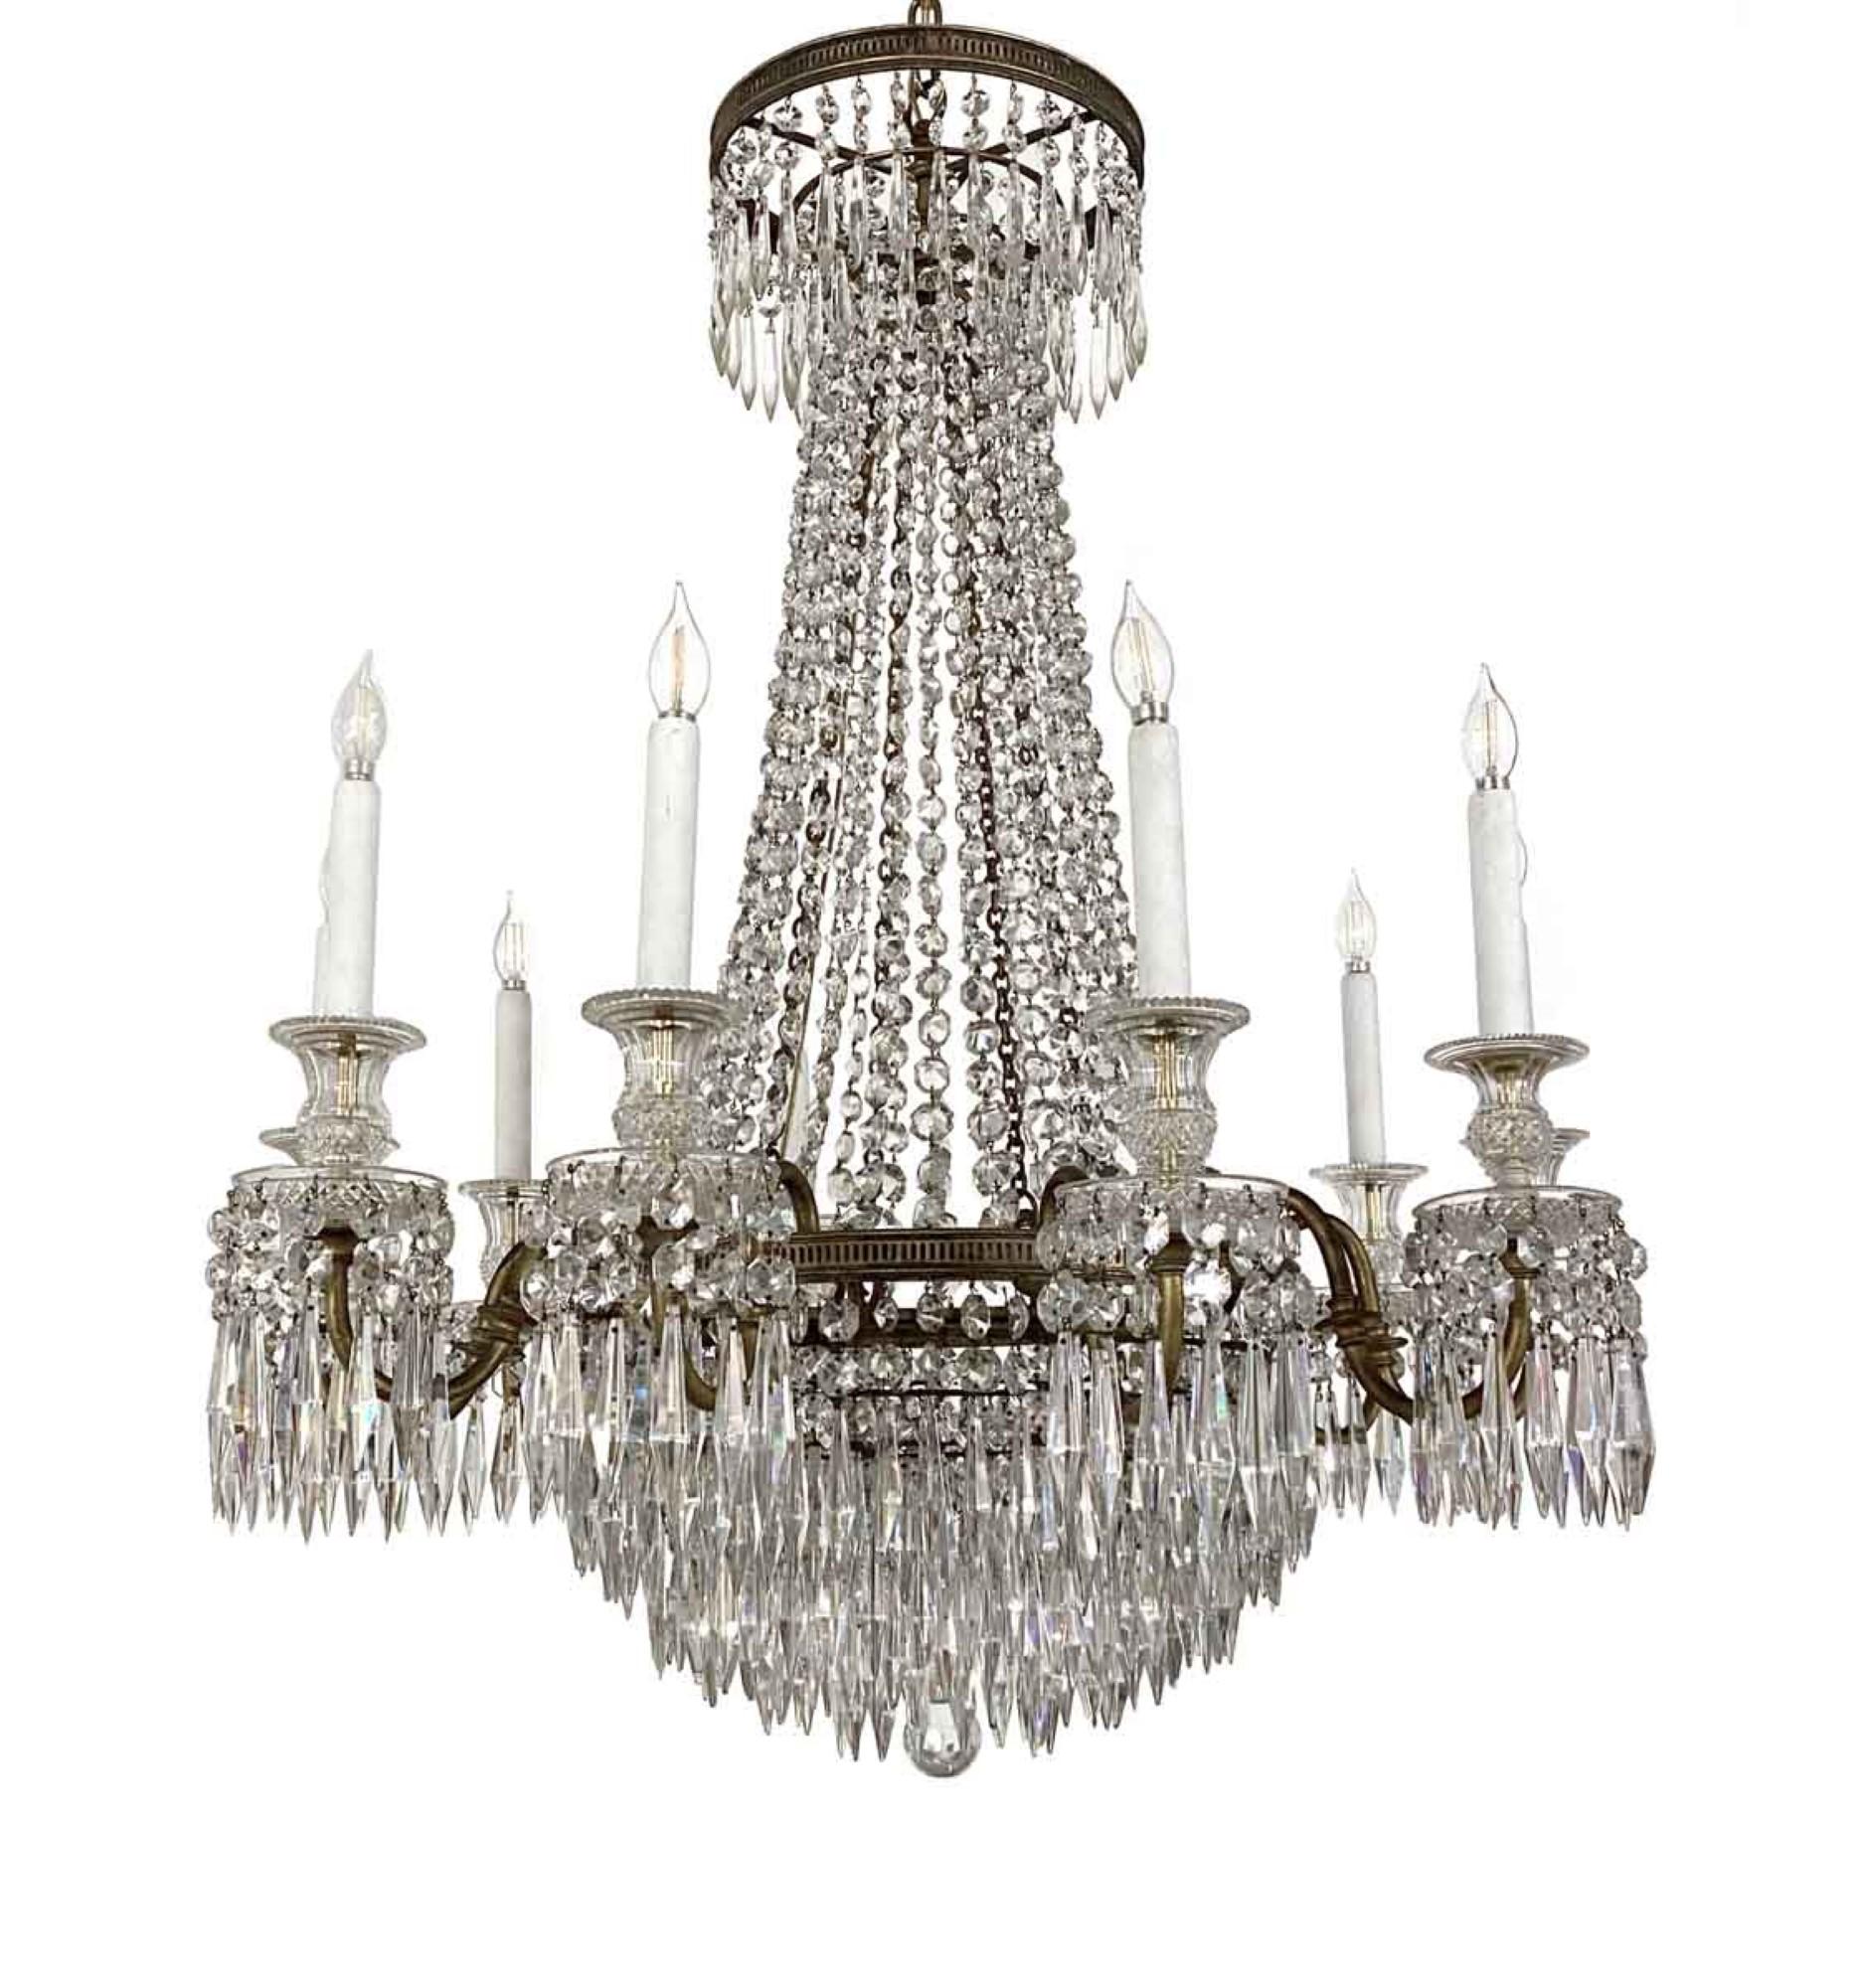 1920s antique French Regency crystal and bronze chandelier with hand cut lead crystals. Crystals have some minor chips. Please see the photos. Please note, this item is located in one of our NYC locations.